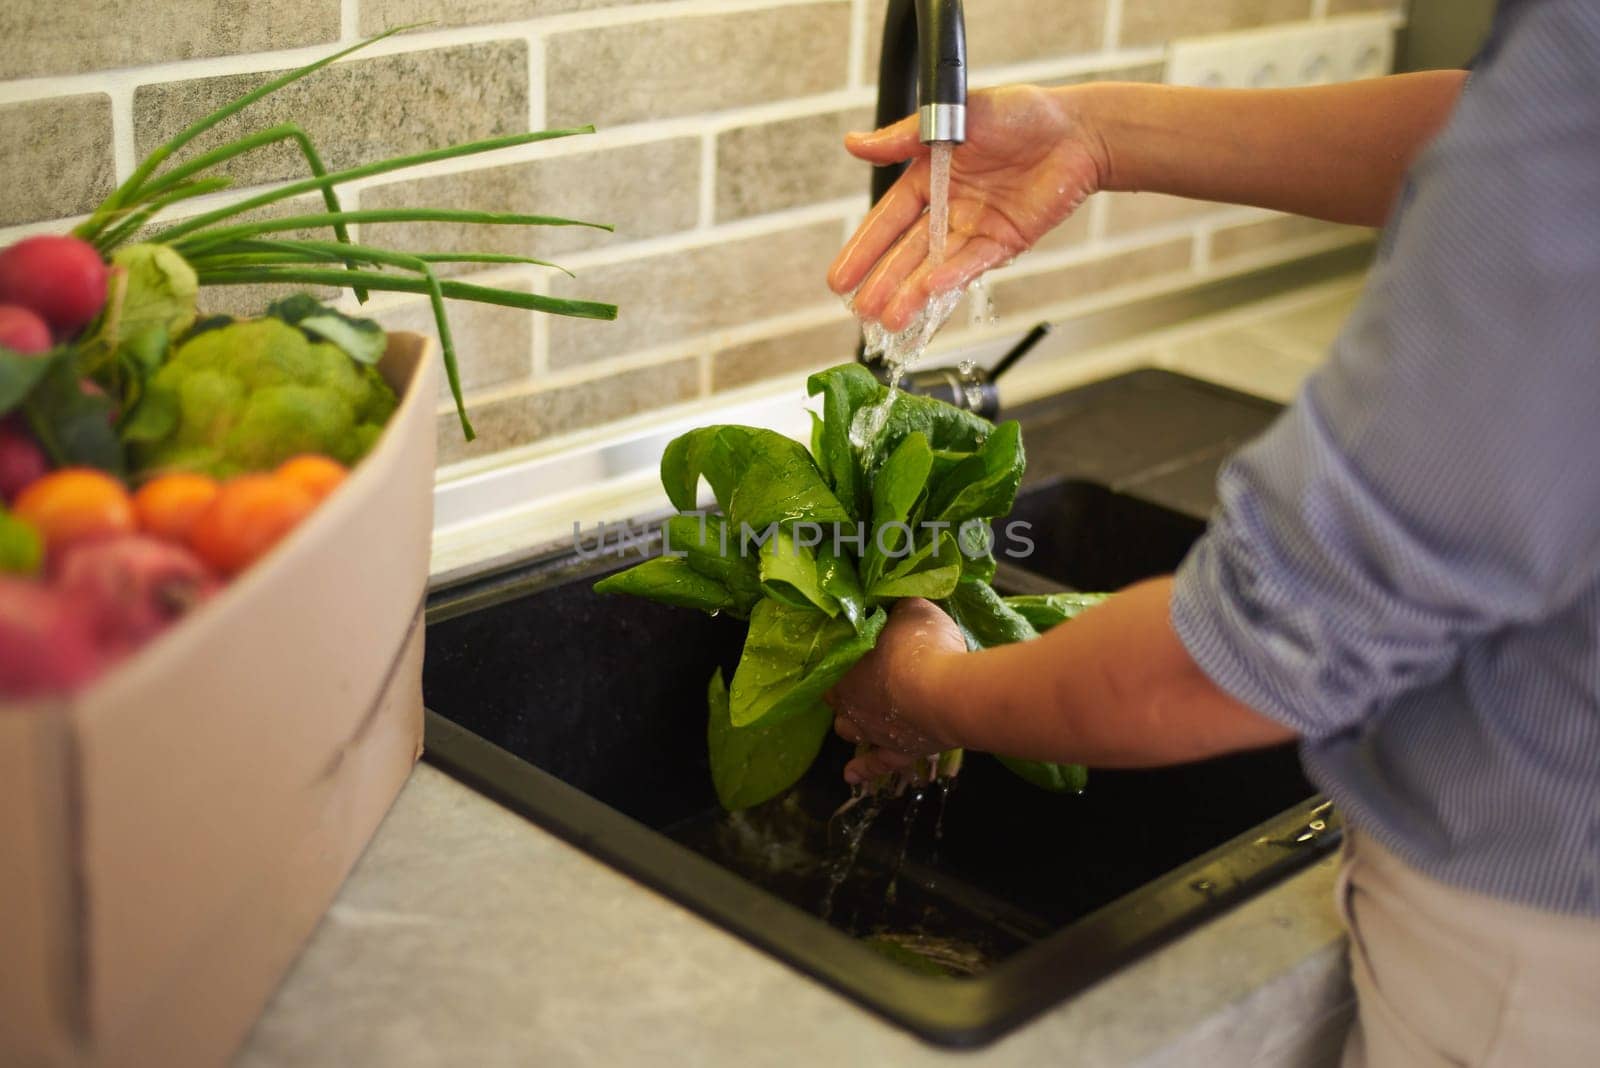 Close-up view of woman's hands washing fresh organic spinach leaves under flowing water in the kitchen sink. by artgf